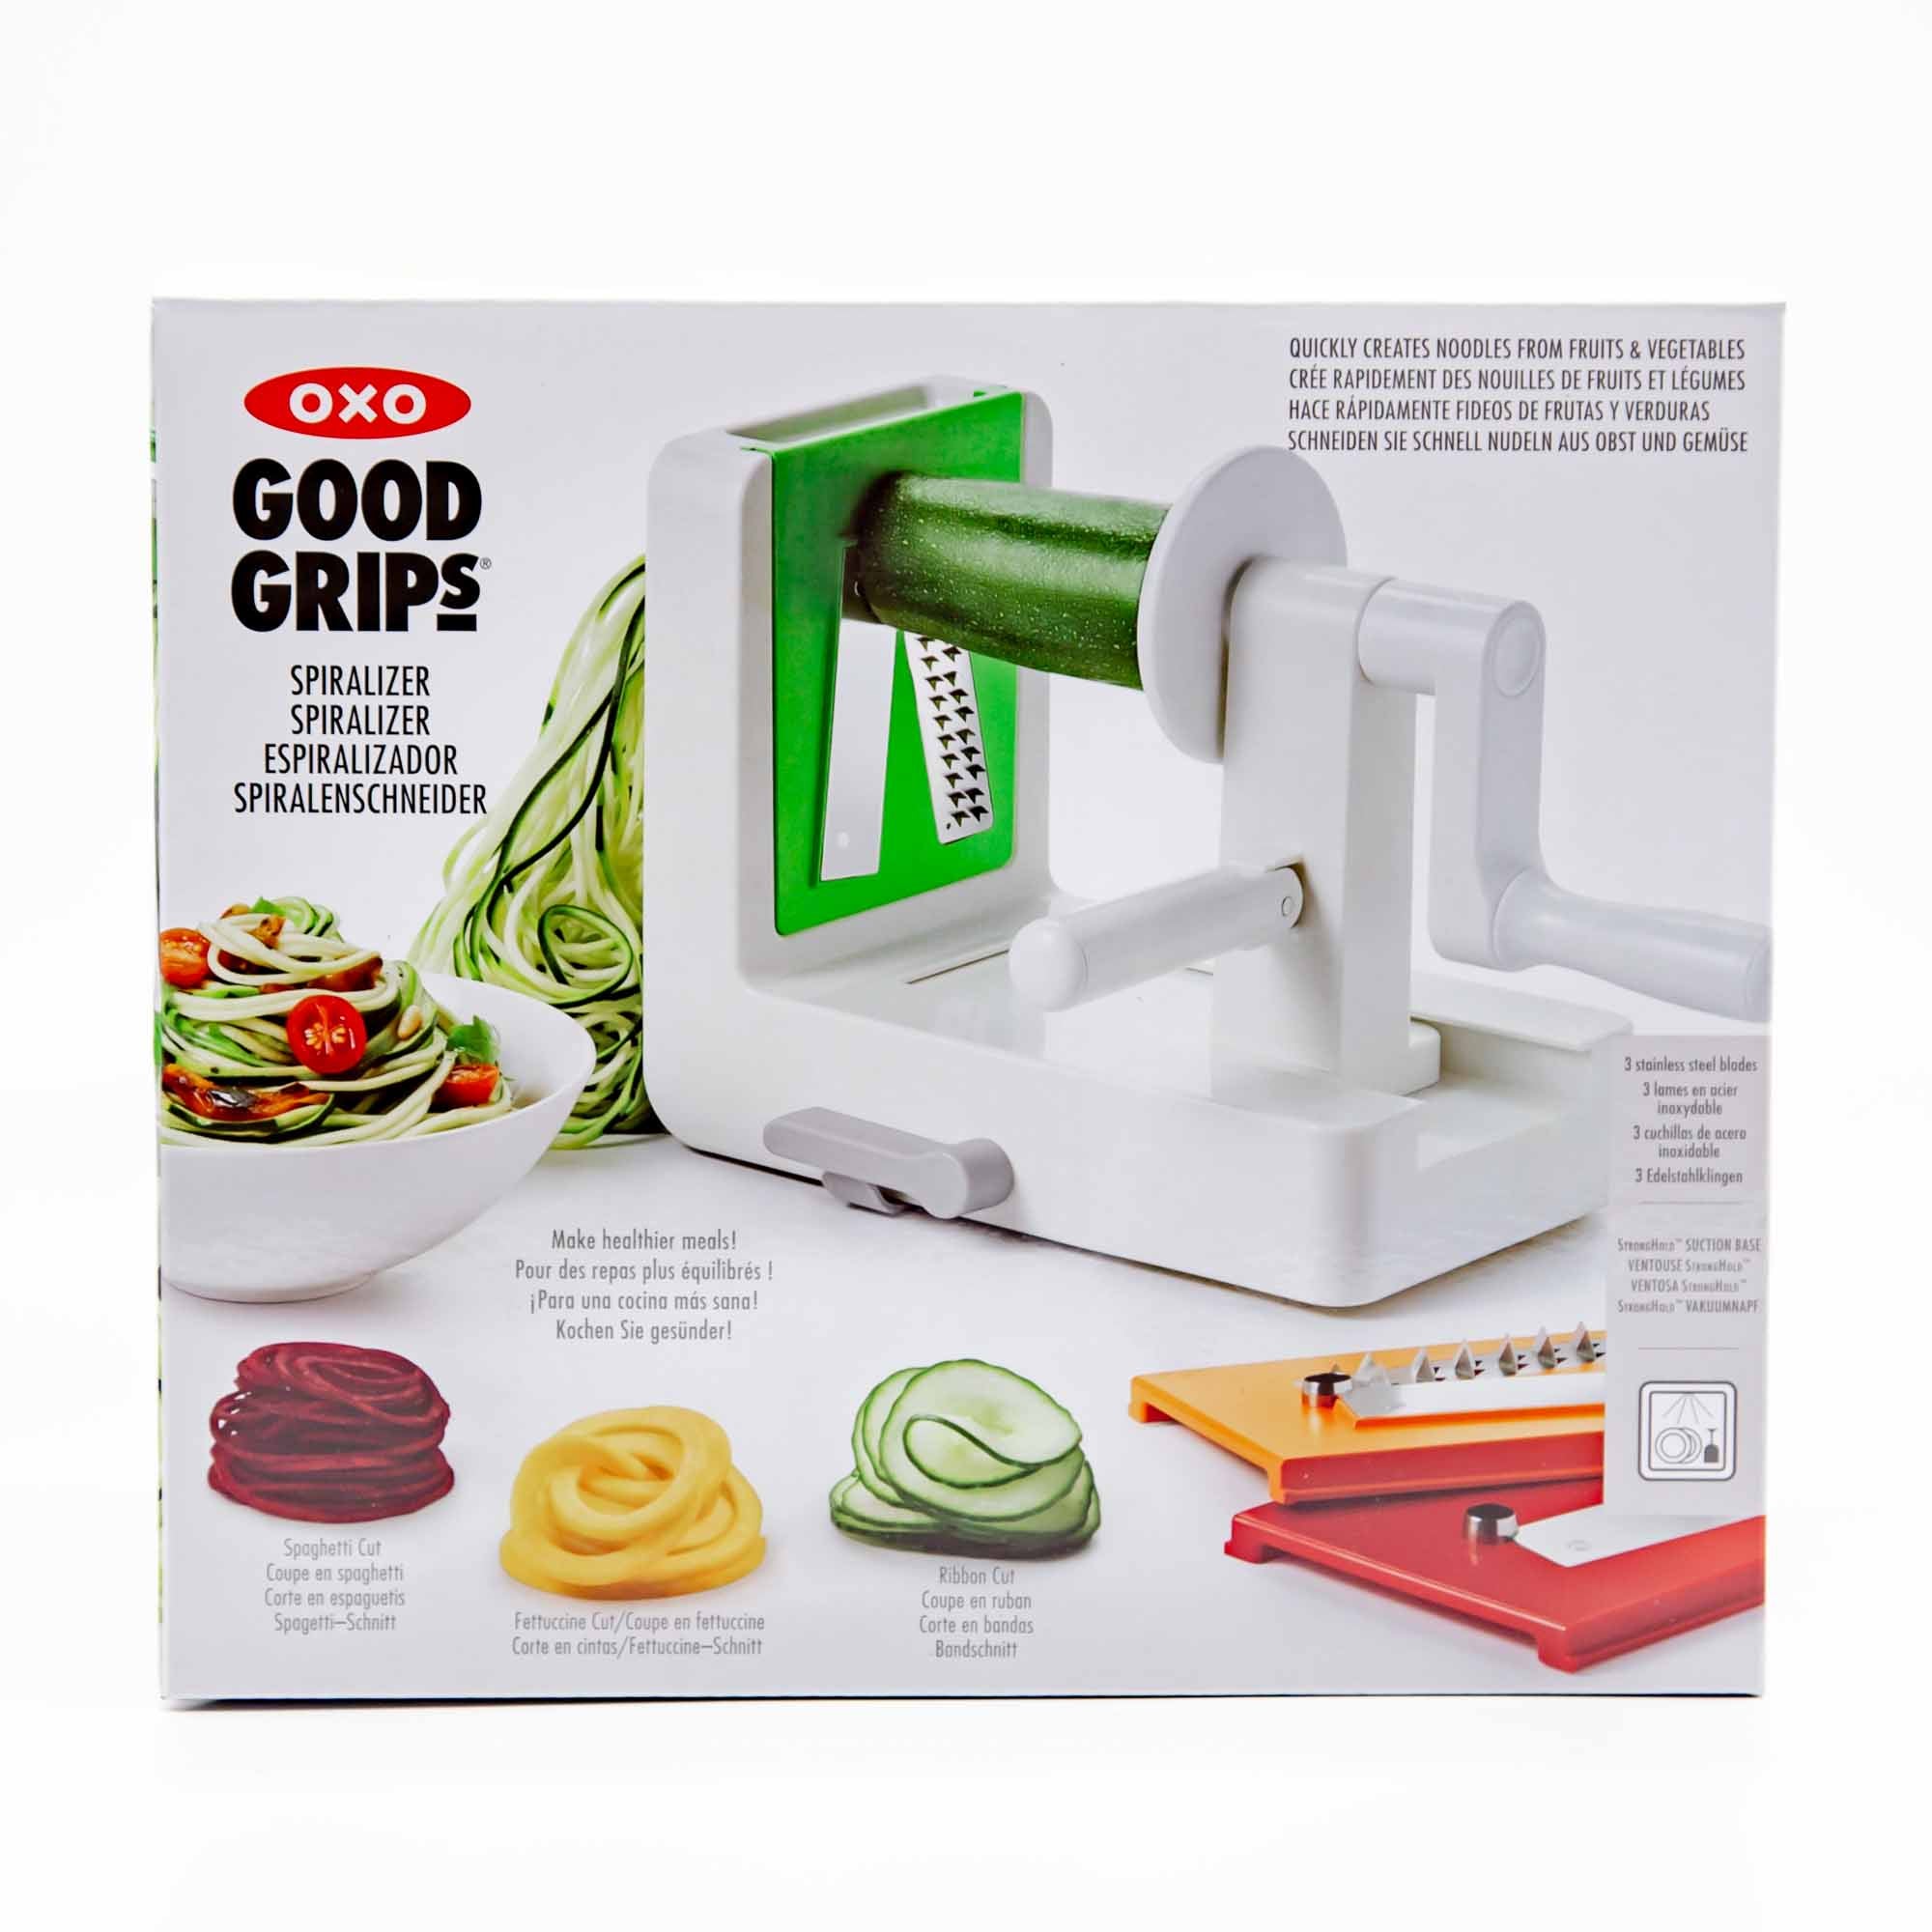 OXO Good Grips Tabletop Spiralizer - Mortise And Tenon